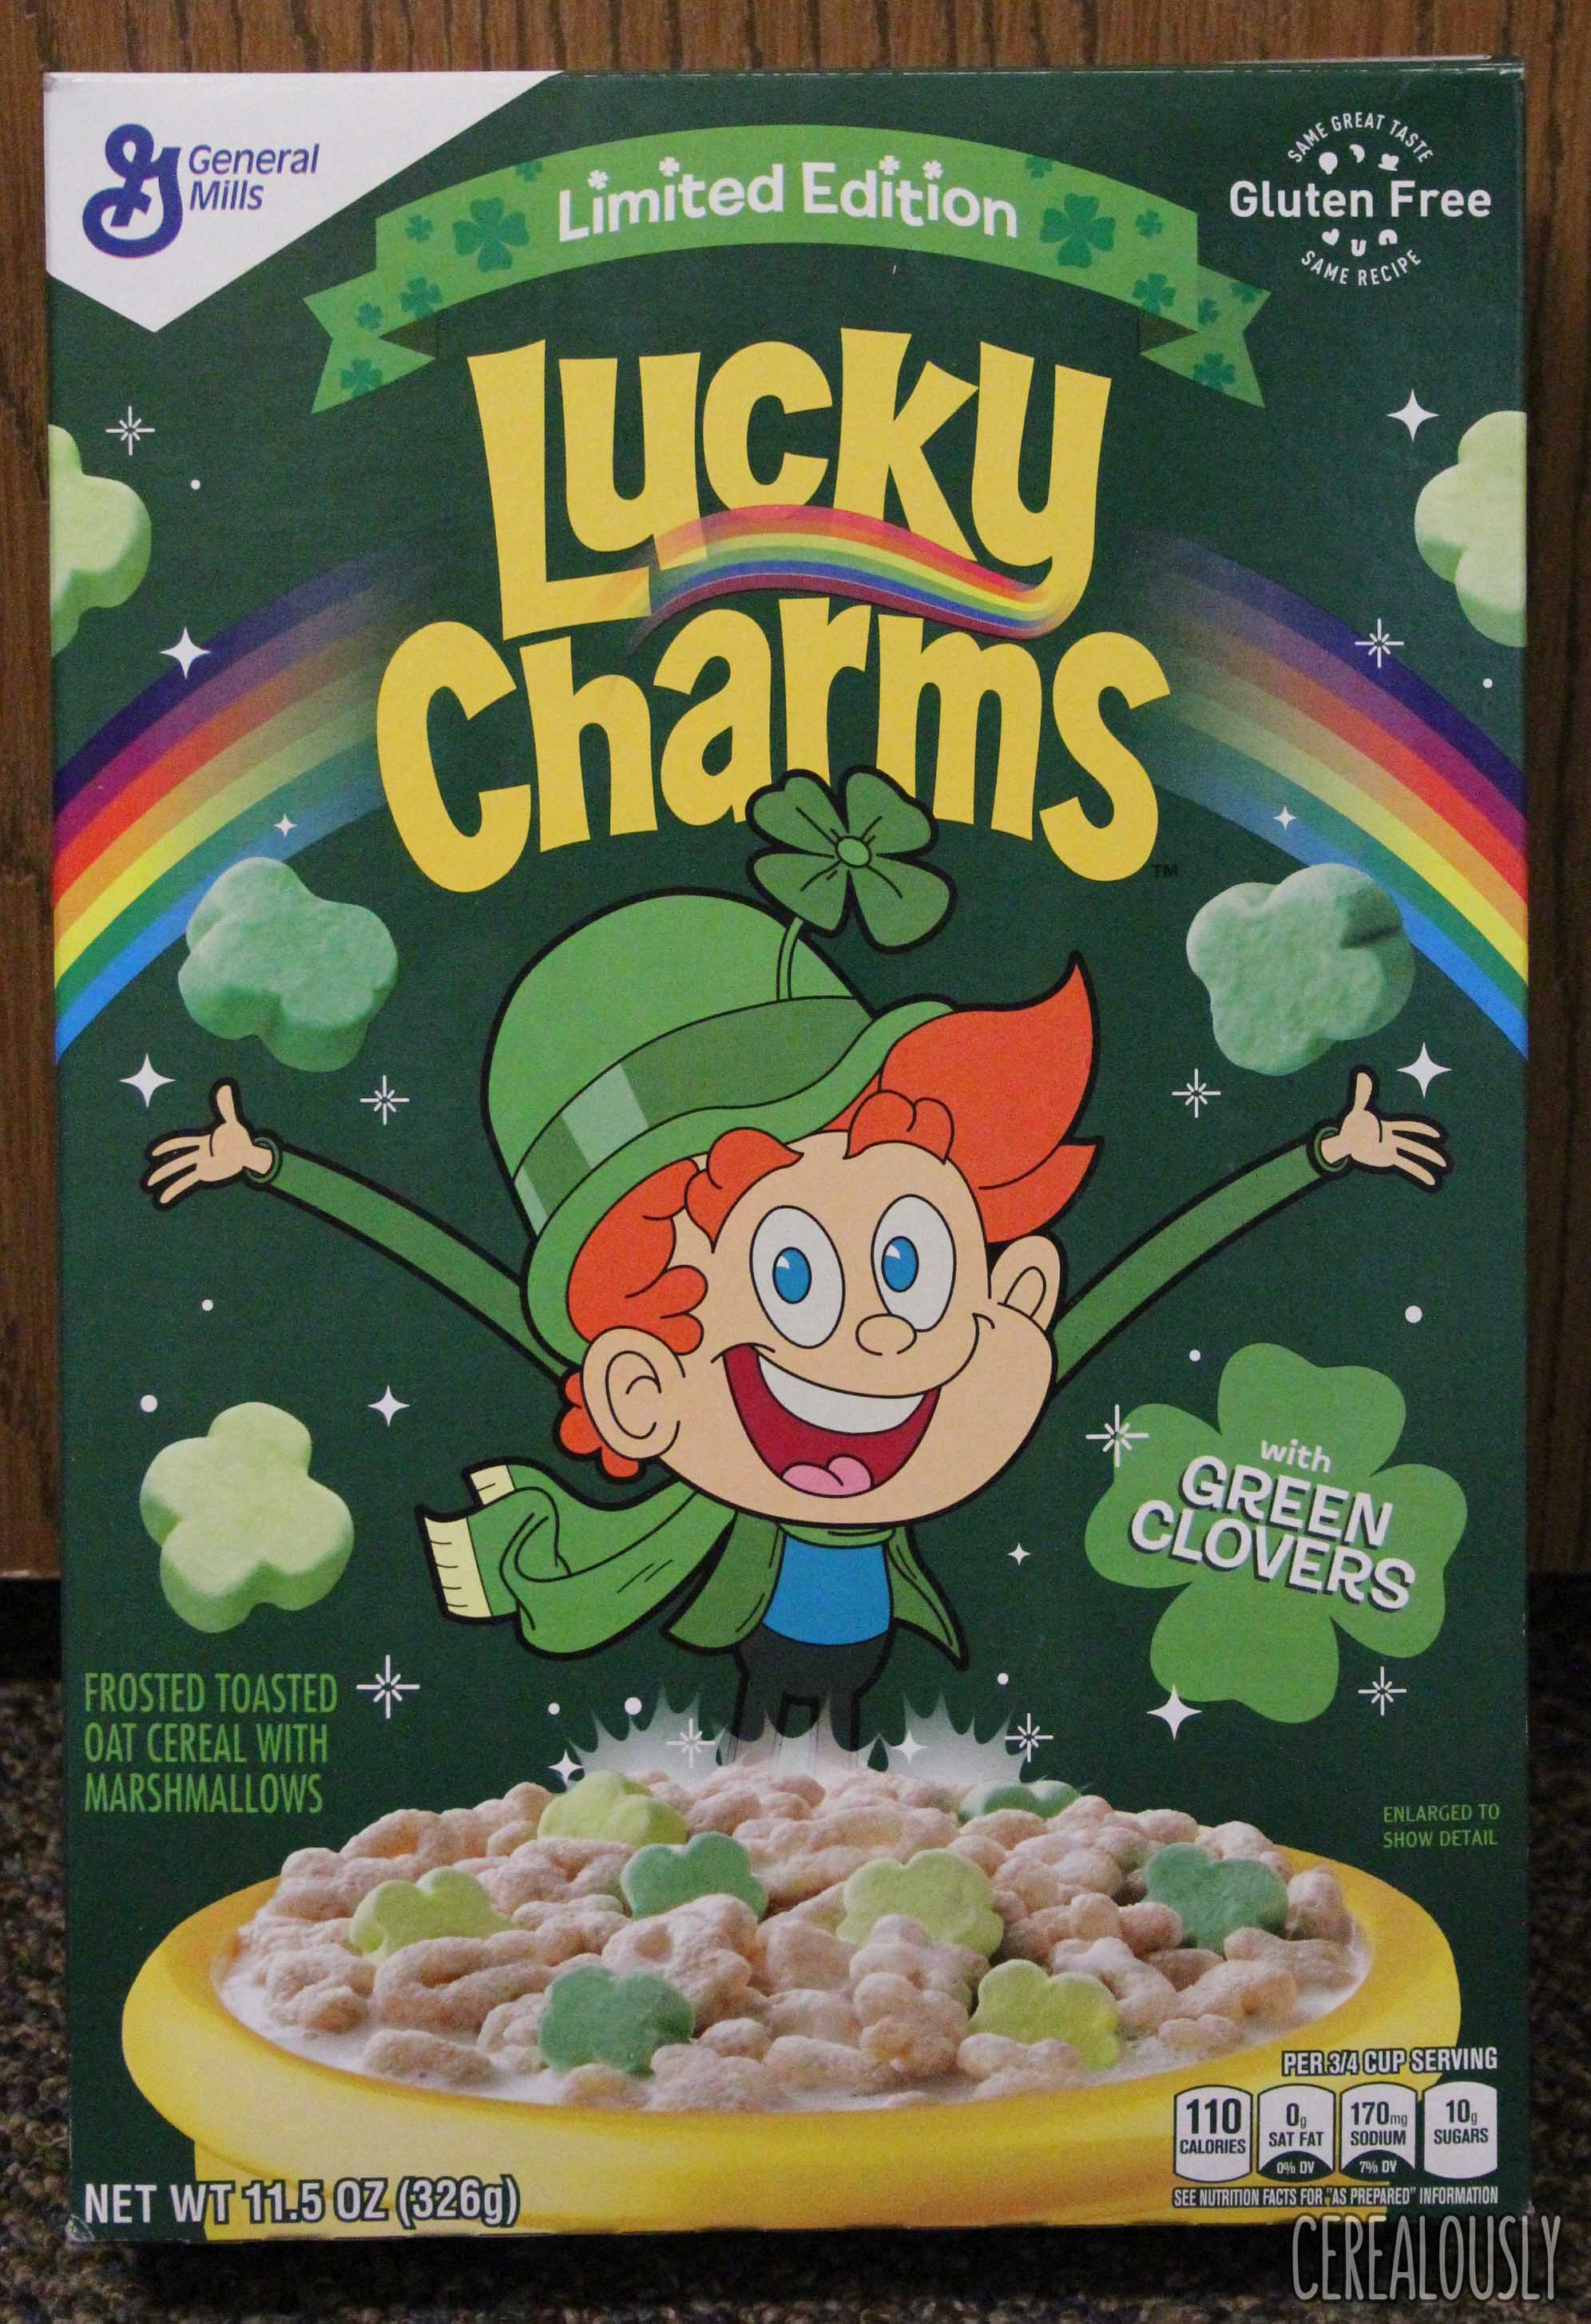 Turn Milk Green Lucky Charms St. Patrick's Day Release